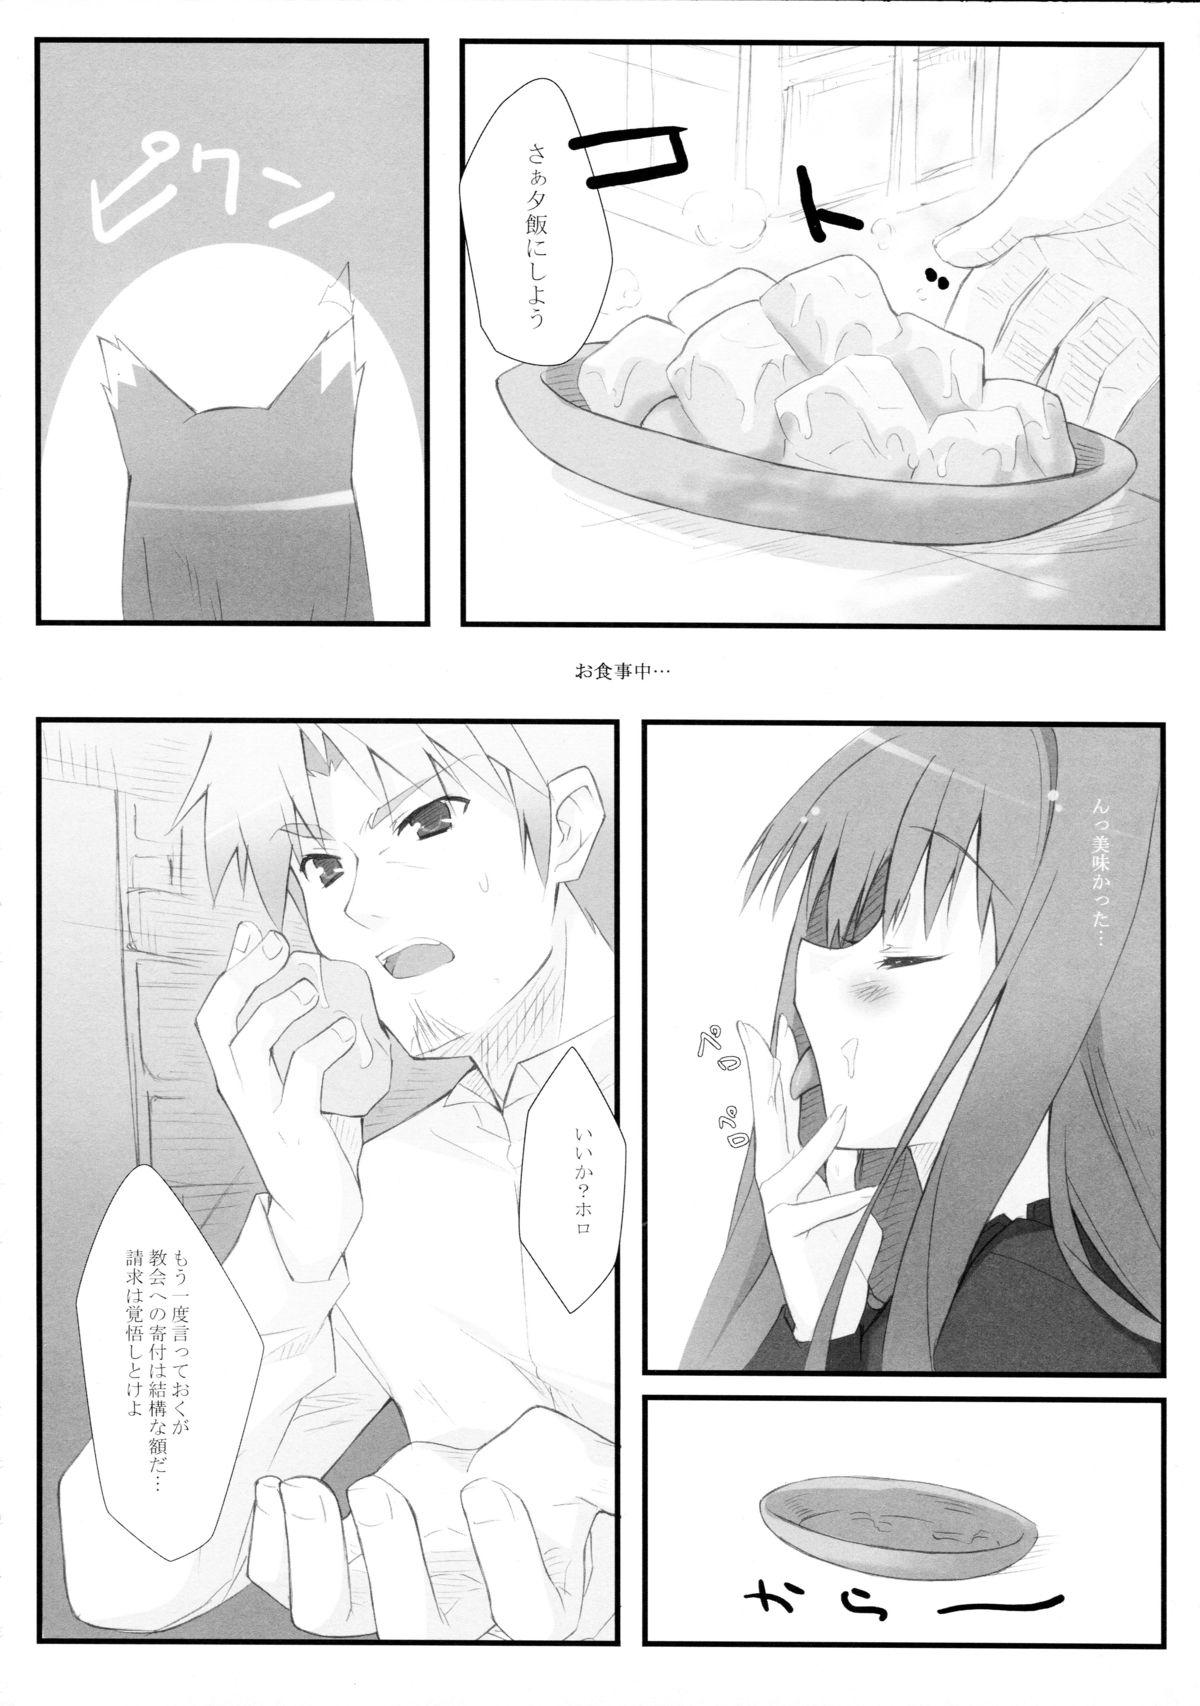 Cums Komugi to Hito to Ookami to - Spice and wolf Free Fuck - Page 4